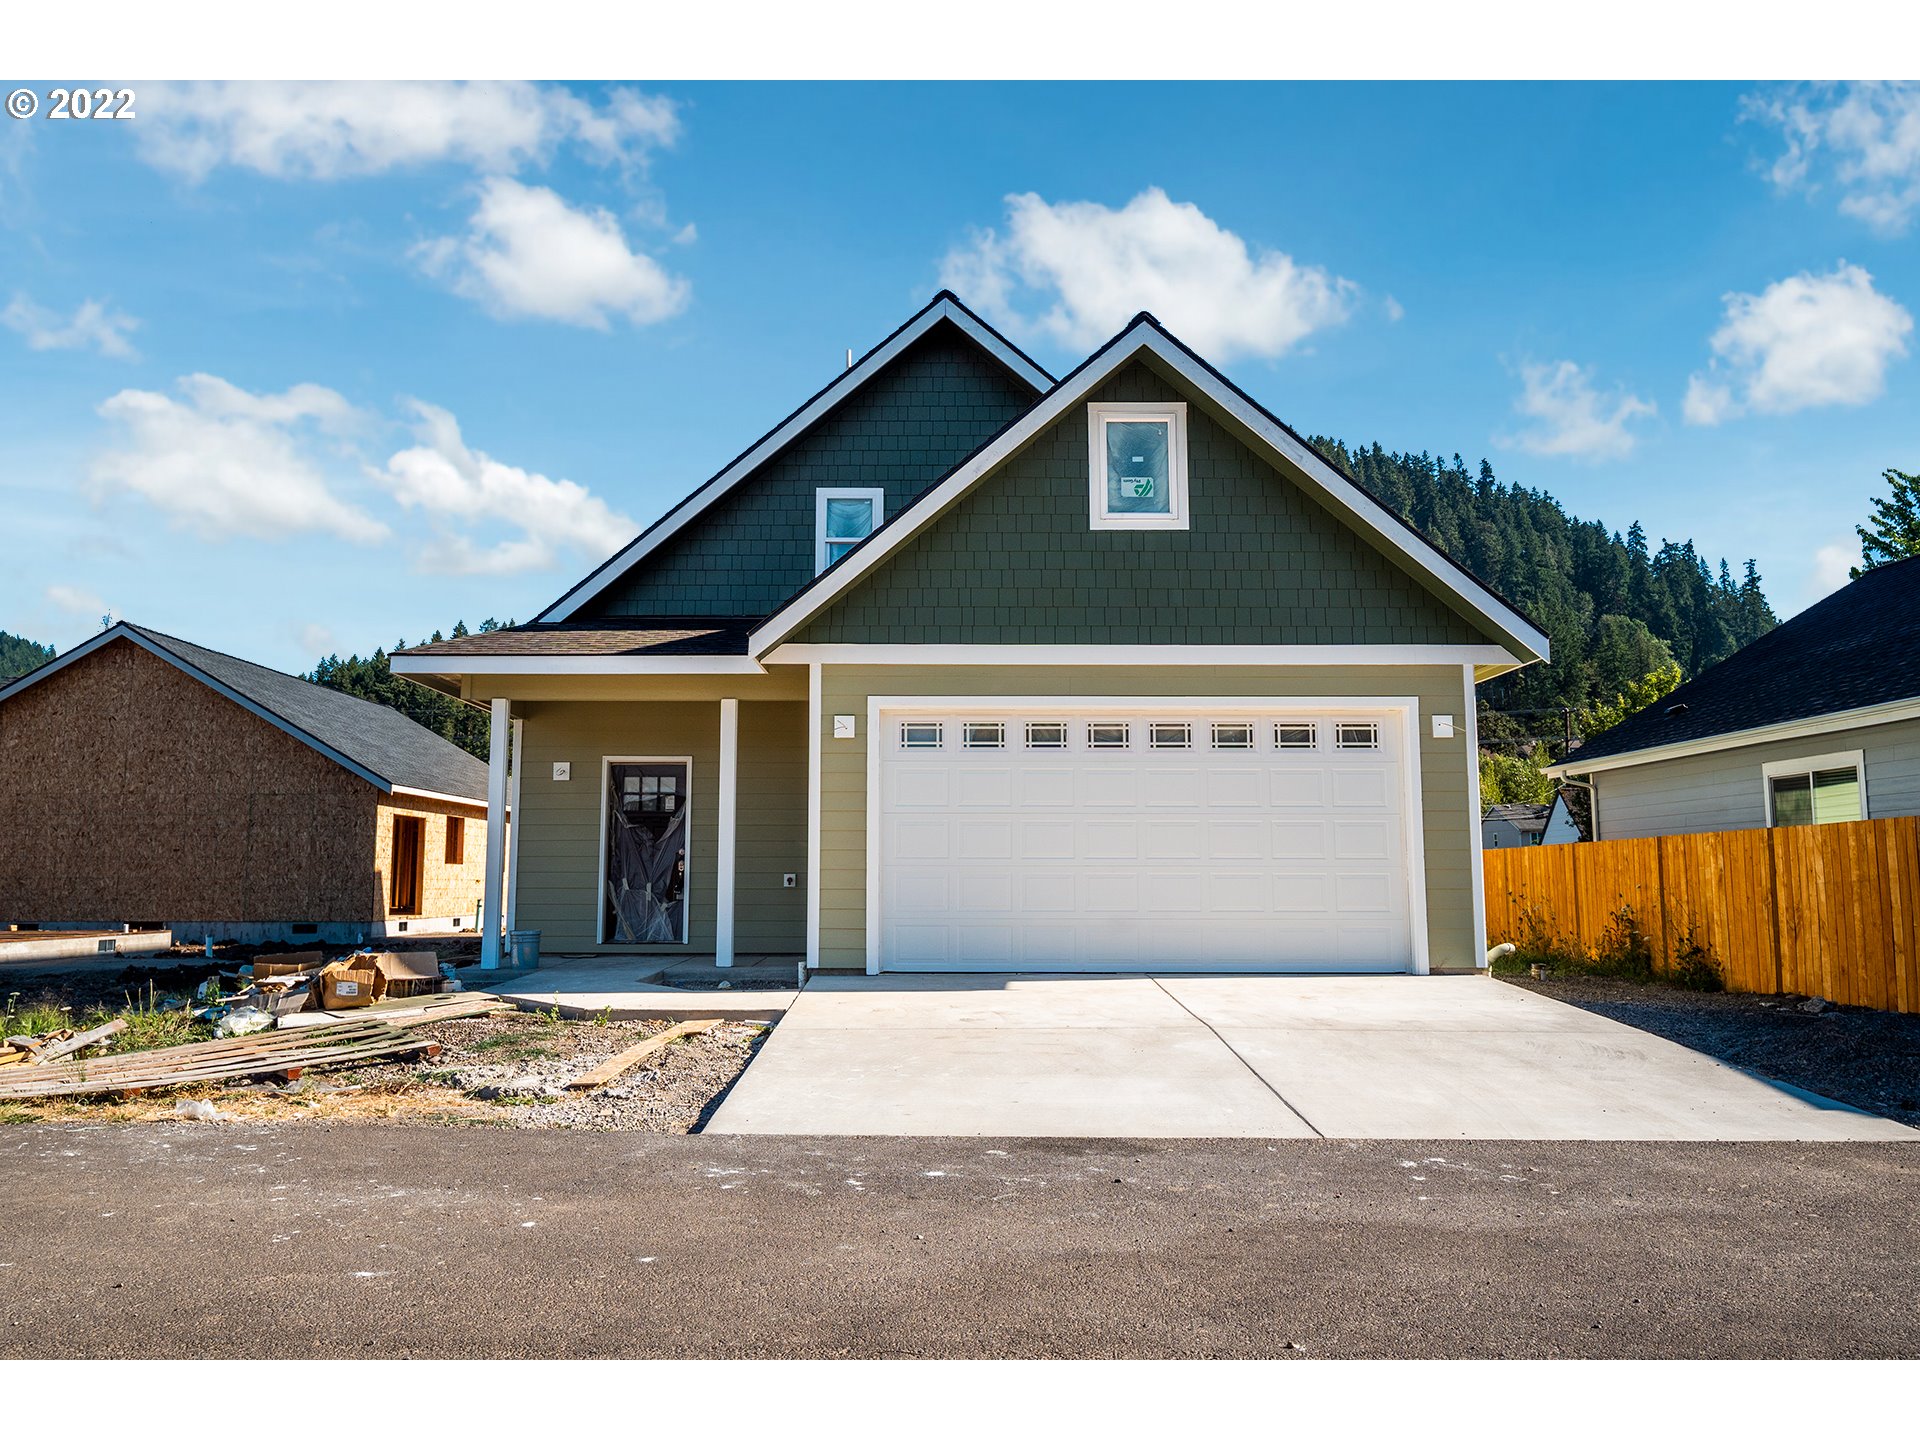 156 65th PL, Springfield, OR 97478